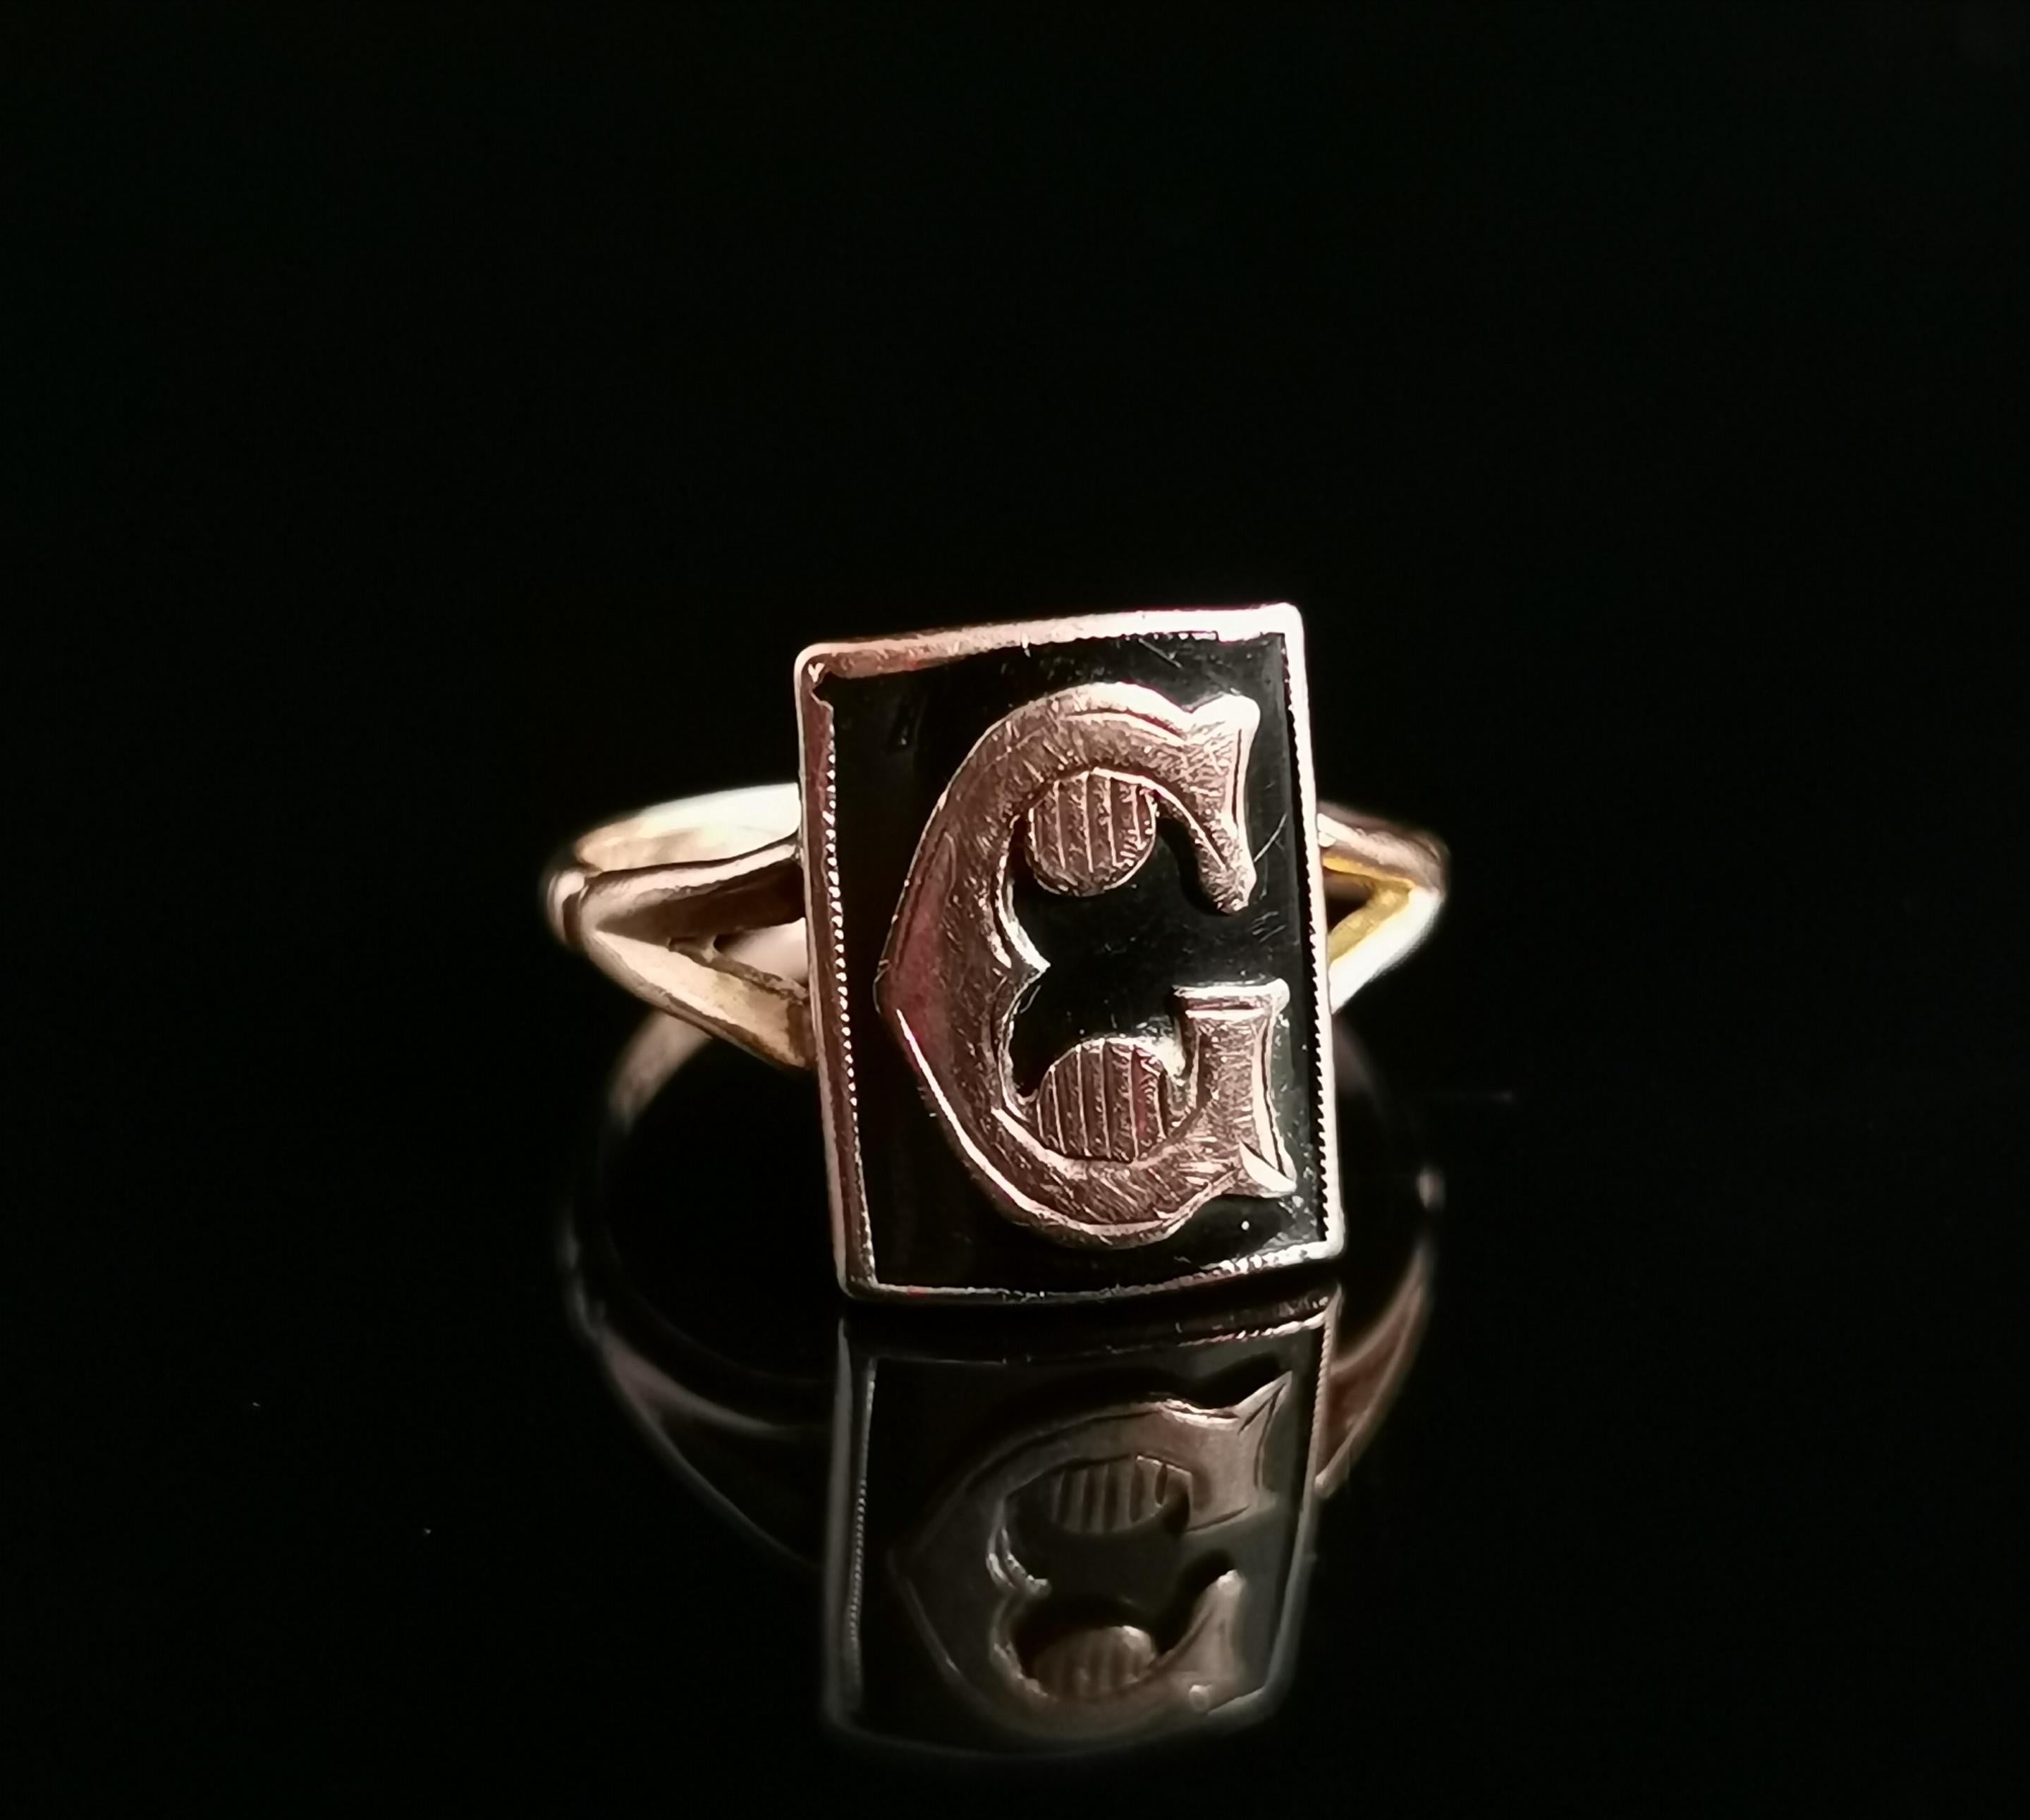 A pretty antique, late Victorian era mourning ring.

This is an initial ring with an applied rose gold letter C, lightly engraved and set on a rich black enamelled panel front.

The ring has decorative split shoulders and a slim smooth polished band